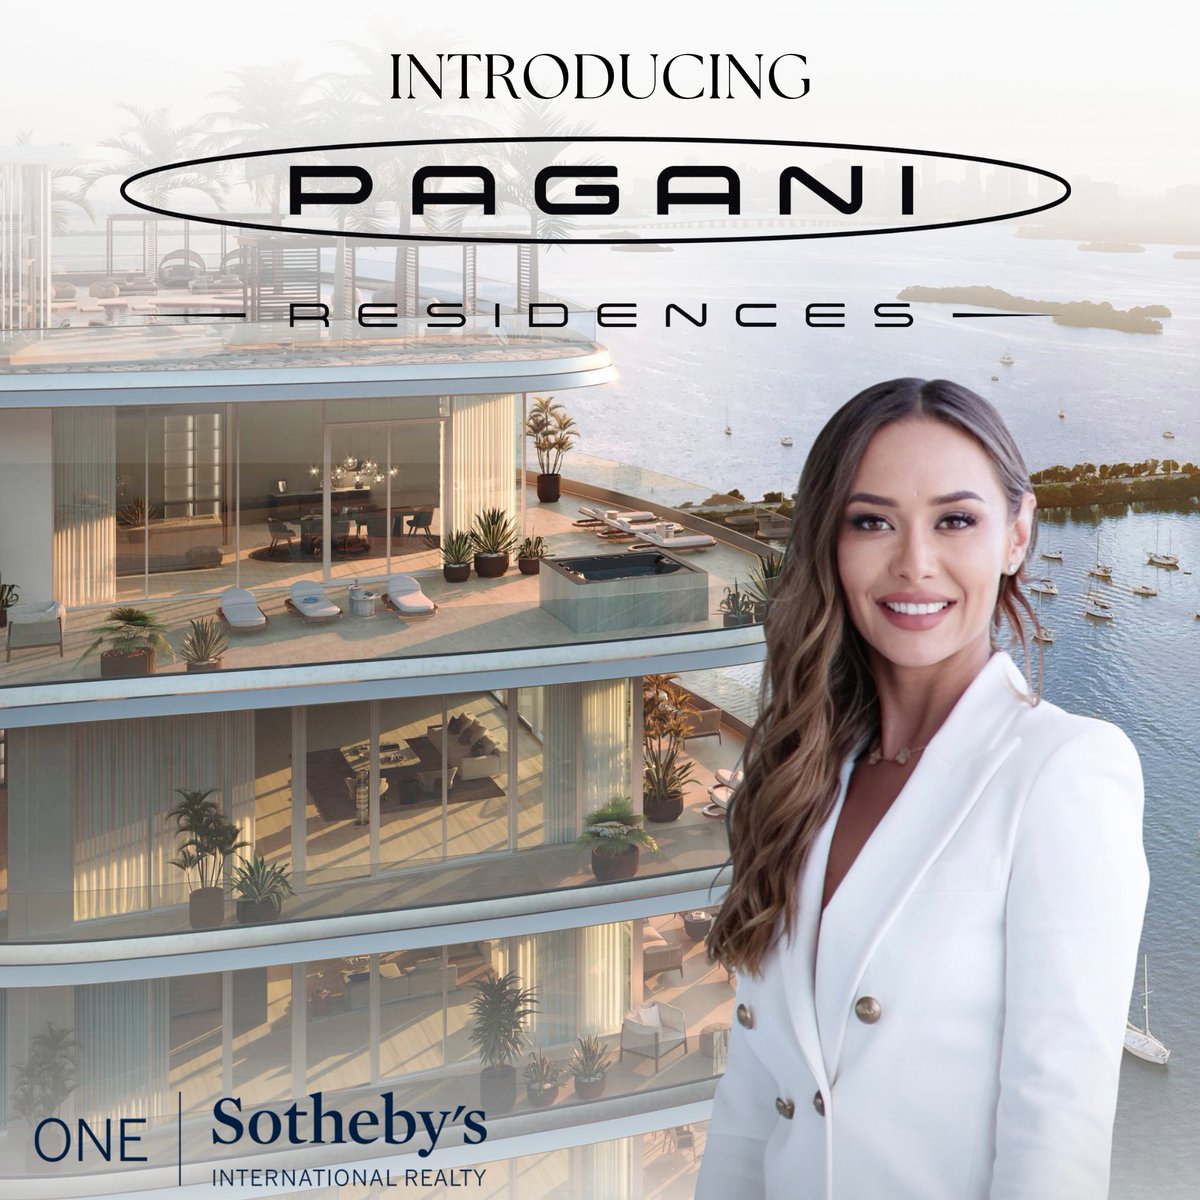 🔸Pagani Residences #Miami🔸
70 waterfront properties, each starting at $2.4 million
Inspired by the Renaissance era, Pagani's supercars and hypercars, the building's construction is set to be completed in 2027.
ekrupennikova@onesothebysrealty.com 
#ElenaKrupennikova